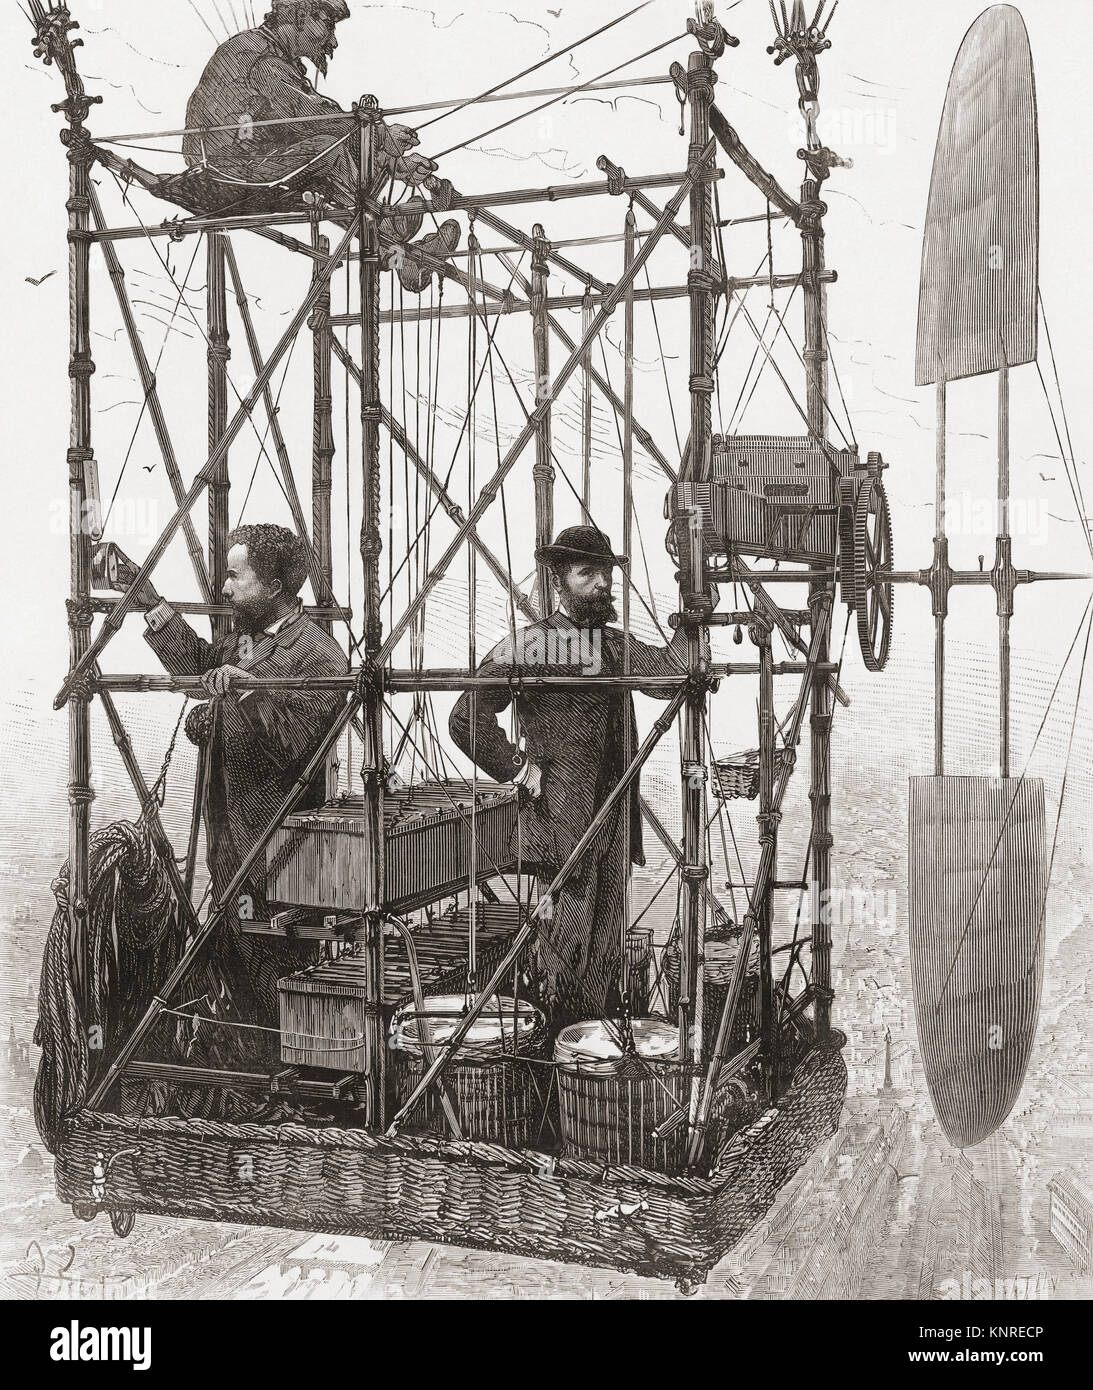 French aviators Albert Tissandier (left) and his brother Gaston Tissandier.  The unidentified man at top is presumably an assistant mechanic.  Albert Tissandier 1839-1906.  Gaston Tissandier 1843-1899. The picture shows the “cockpit” of their 1883 airship which had been fitted with a Siemens electric motor resulting in aviations first electric-powered flight. Stock Photo